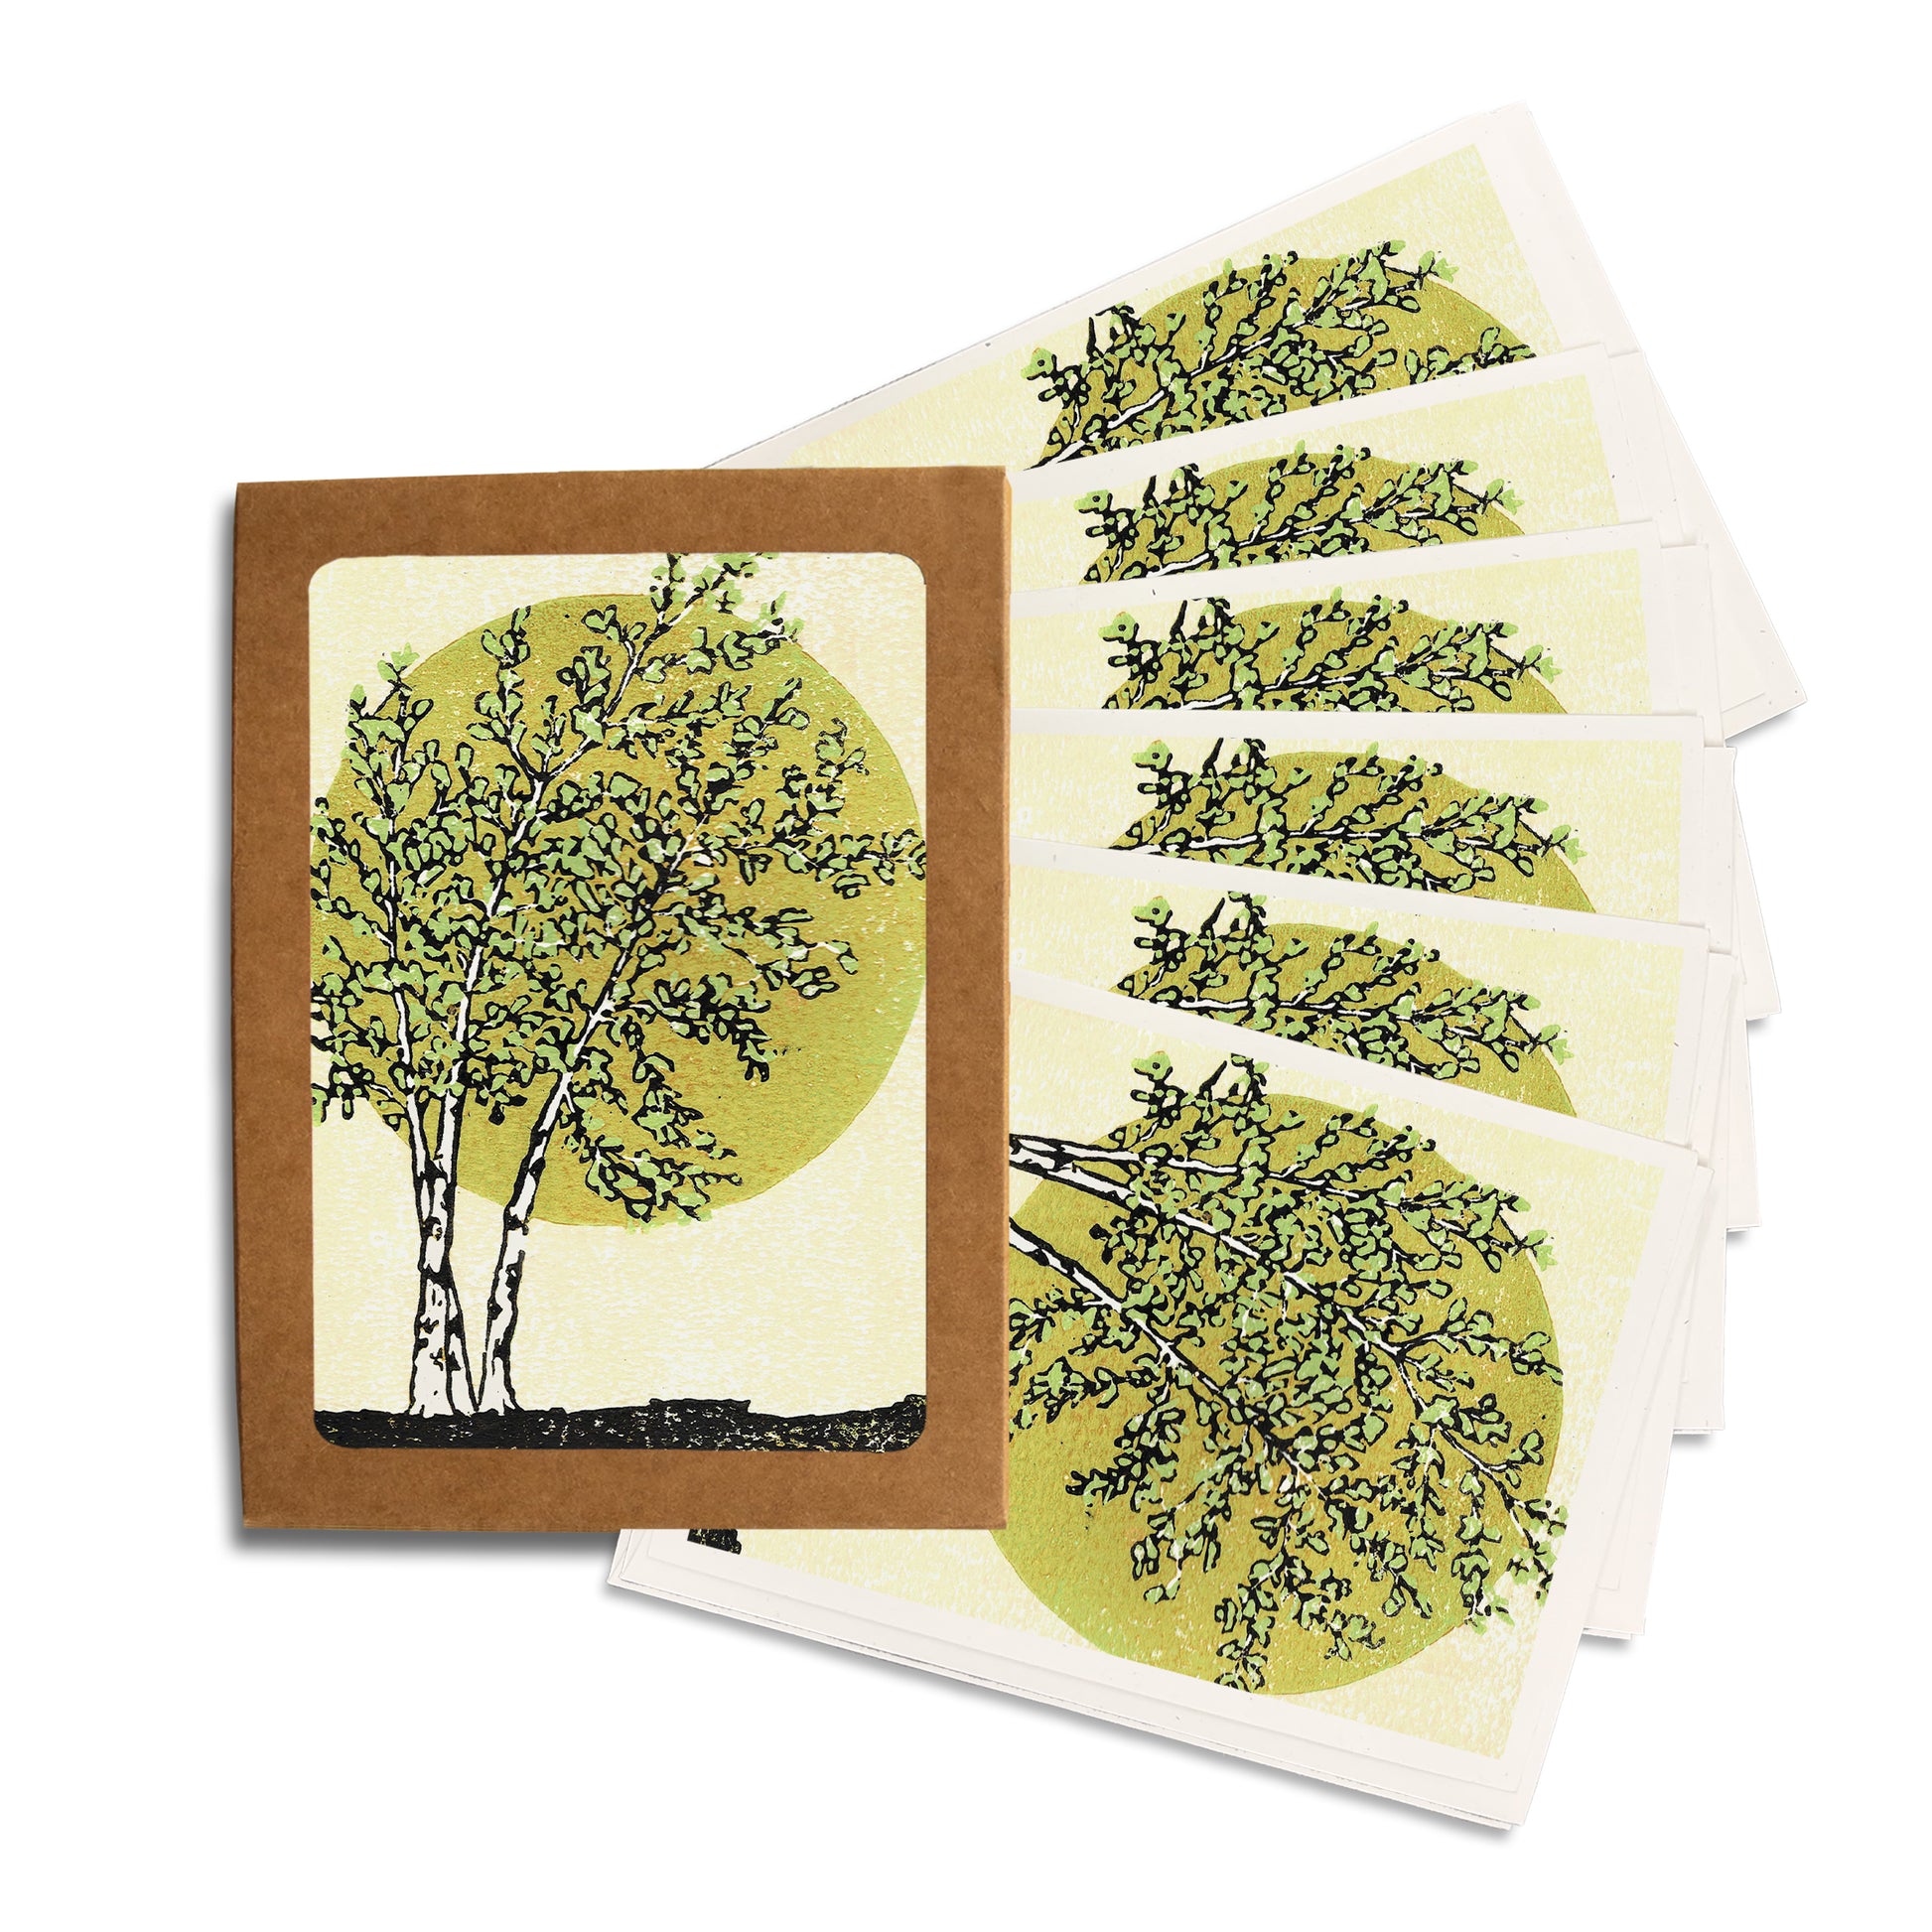 Radiant Birches.  A casually elegant set of cards featuring a digital reproduction of Natalia Wohletz’s Peninsula Prints block print design with the same title.